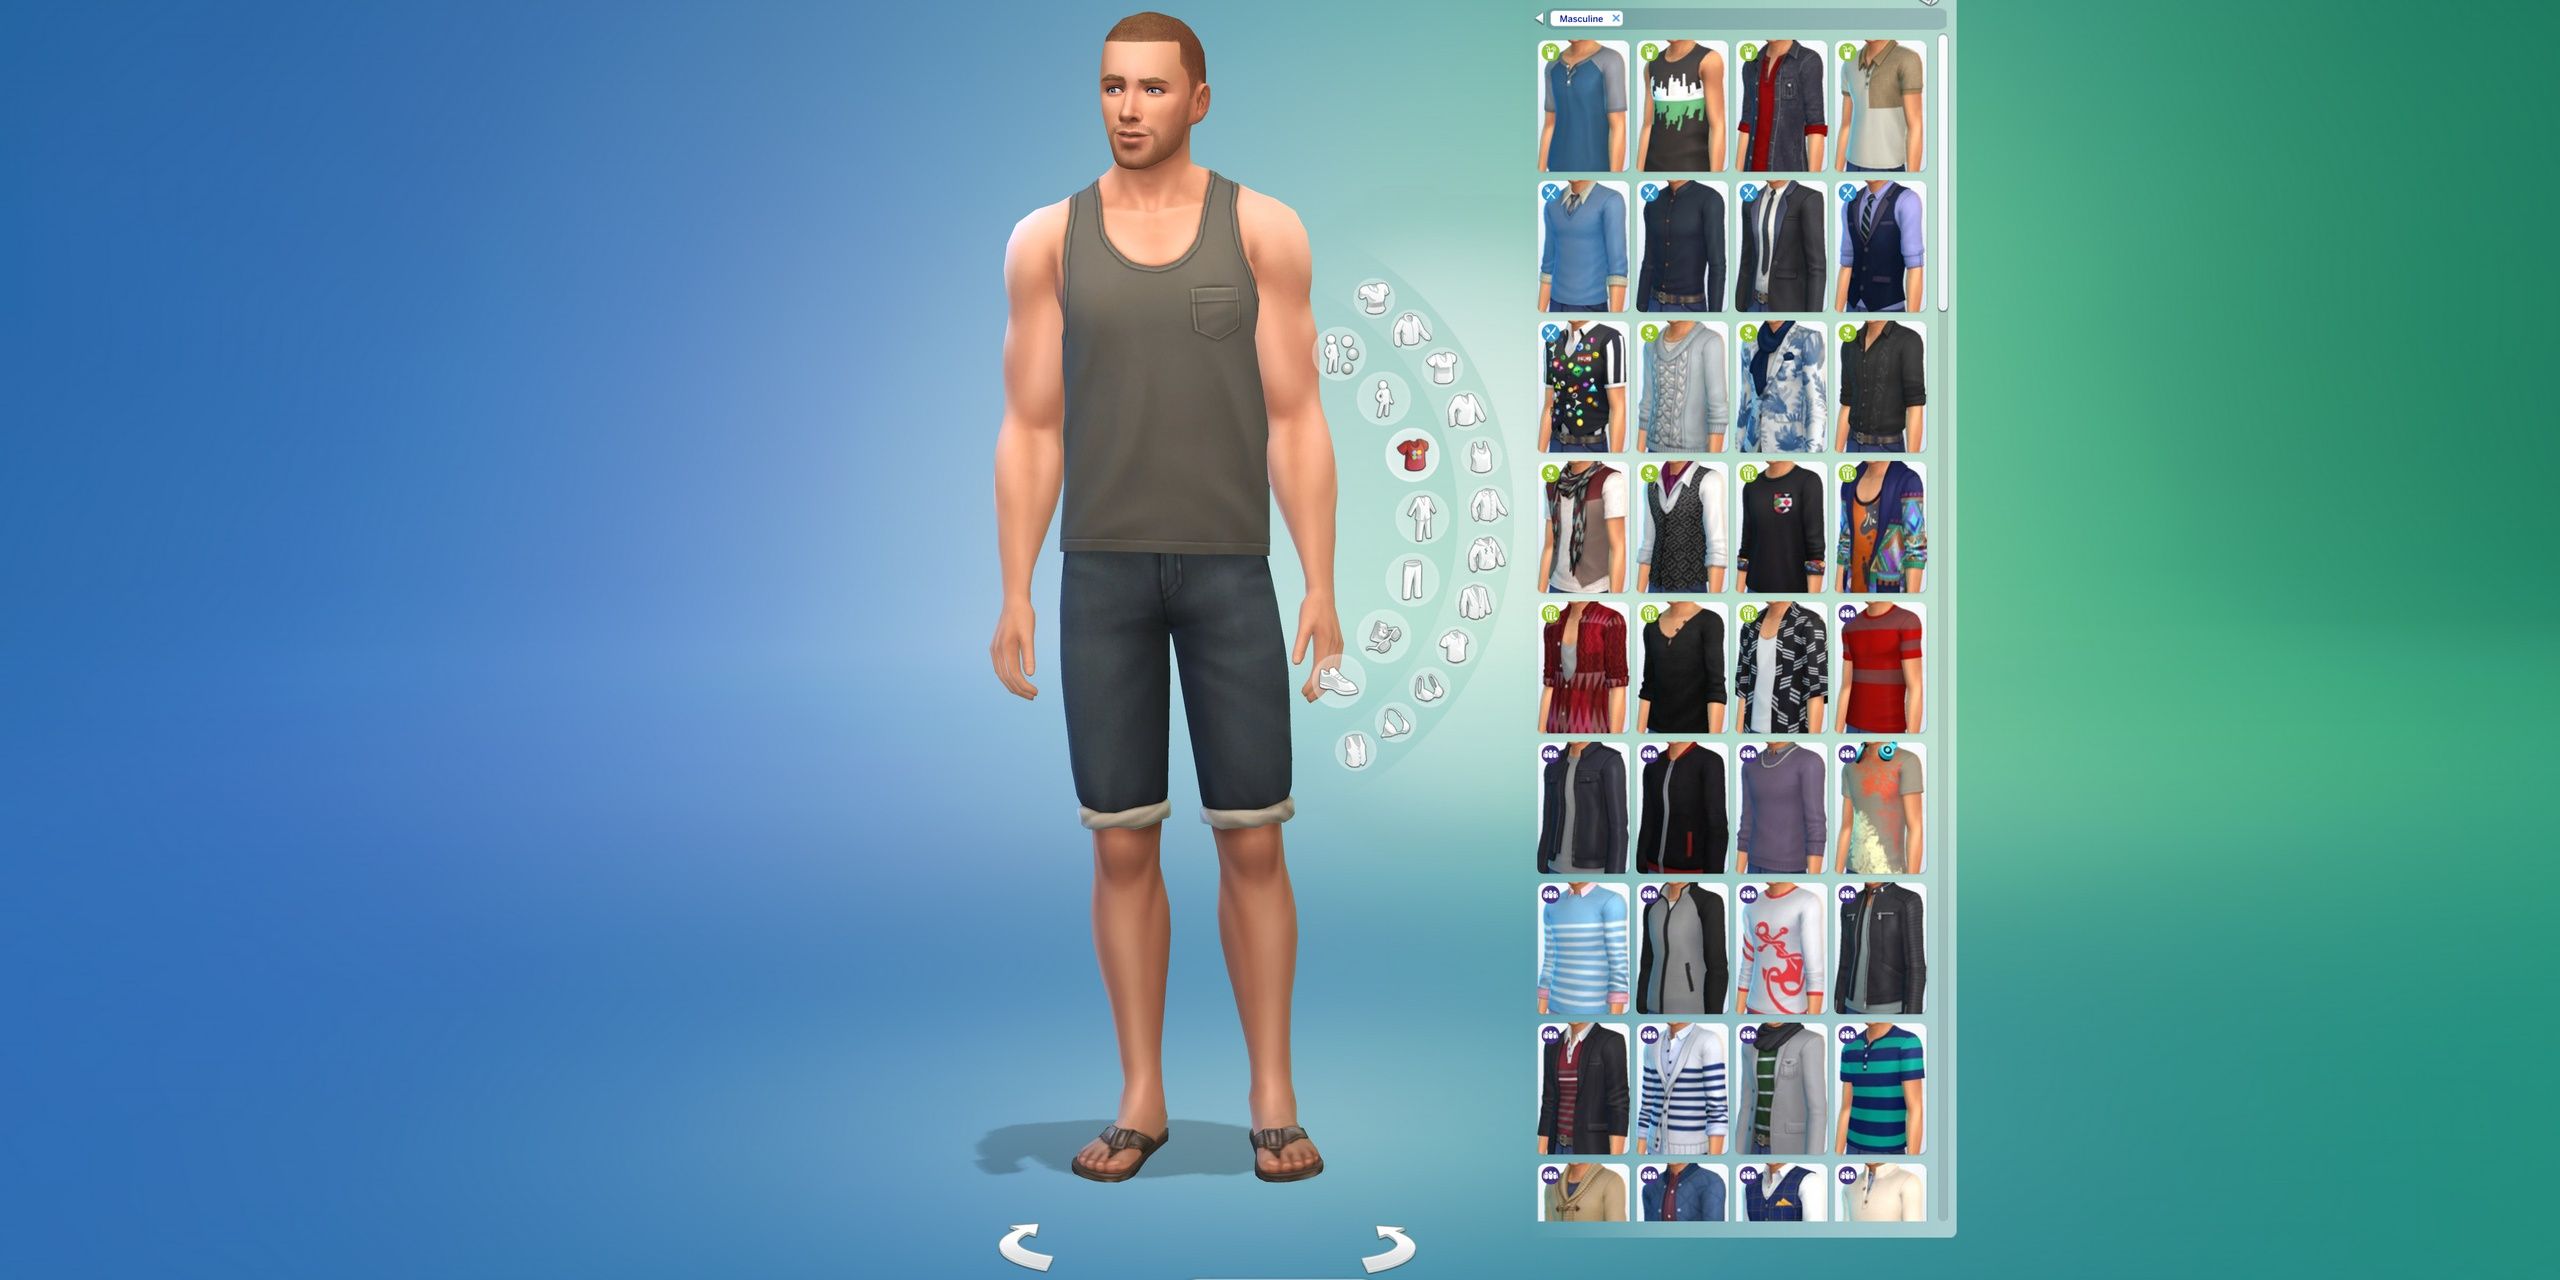 More Columns in CAS mod for The Sims 4